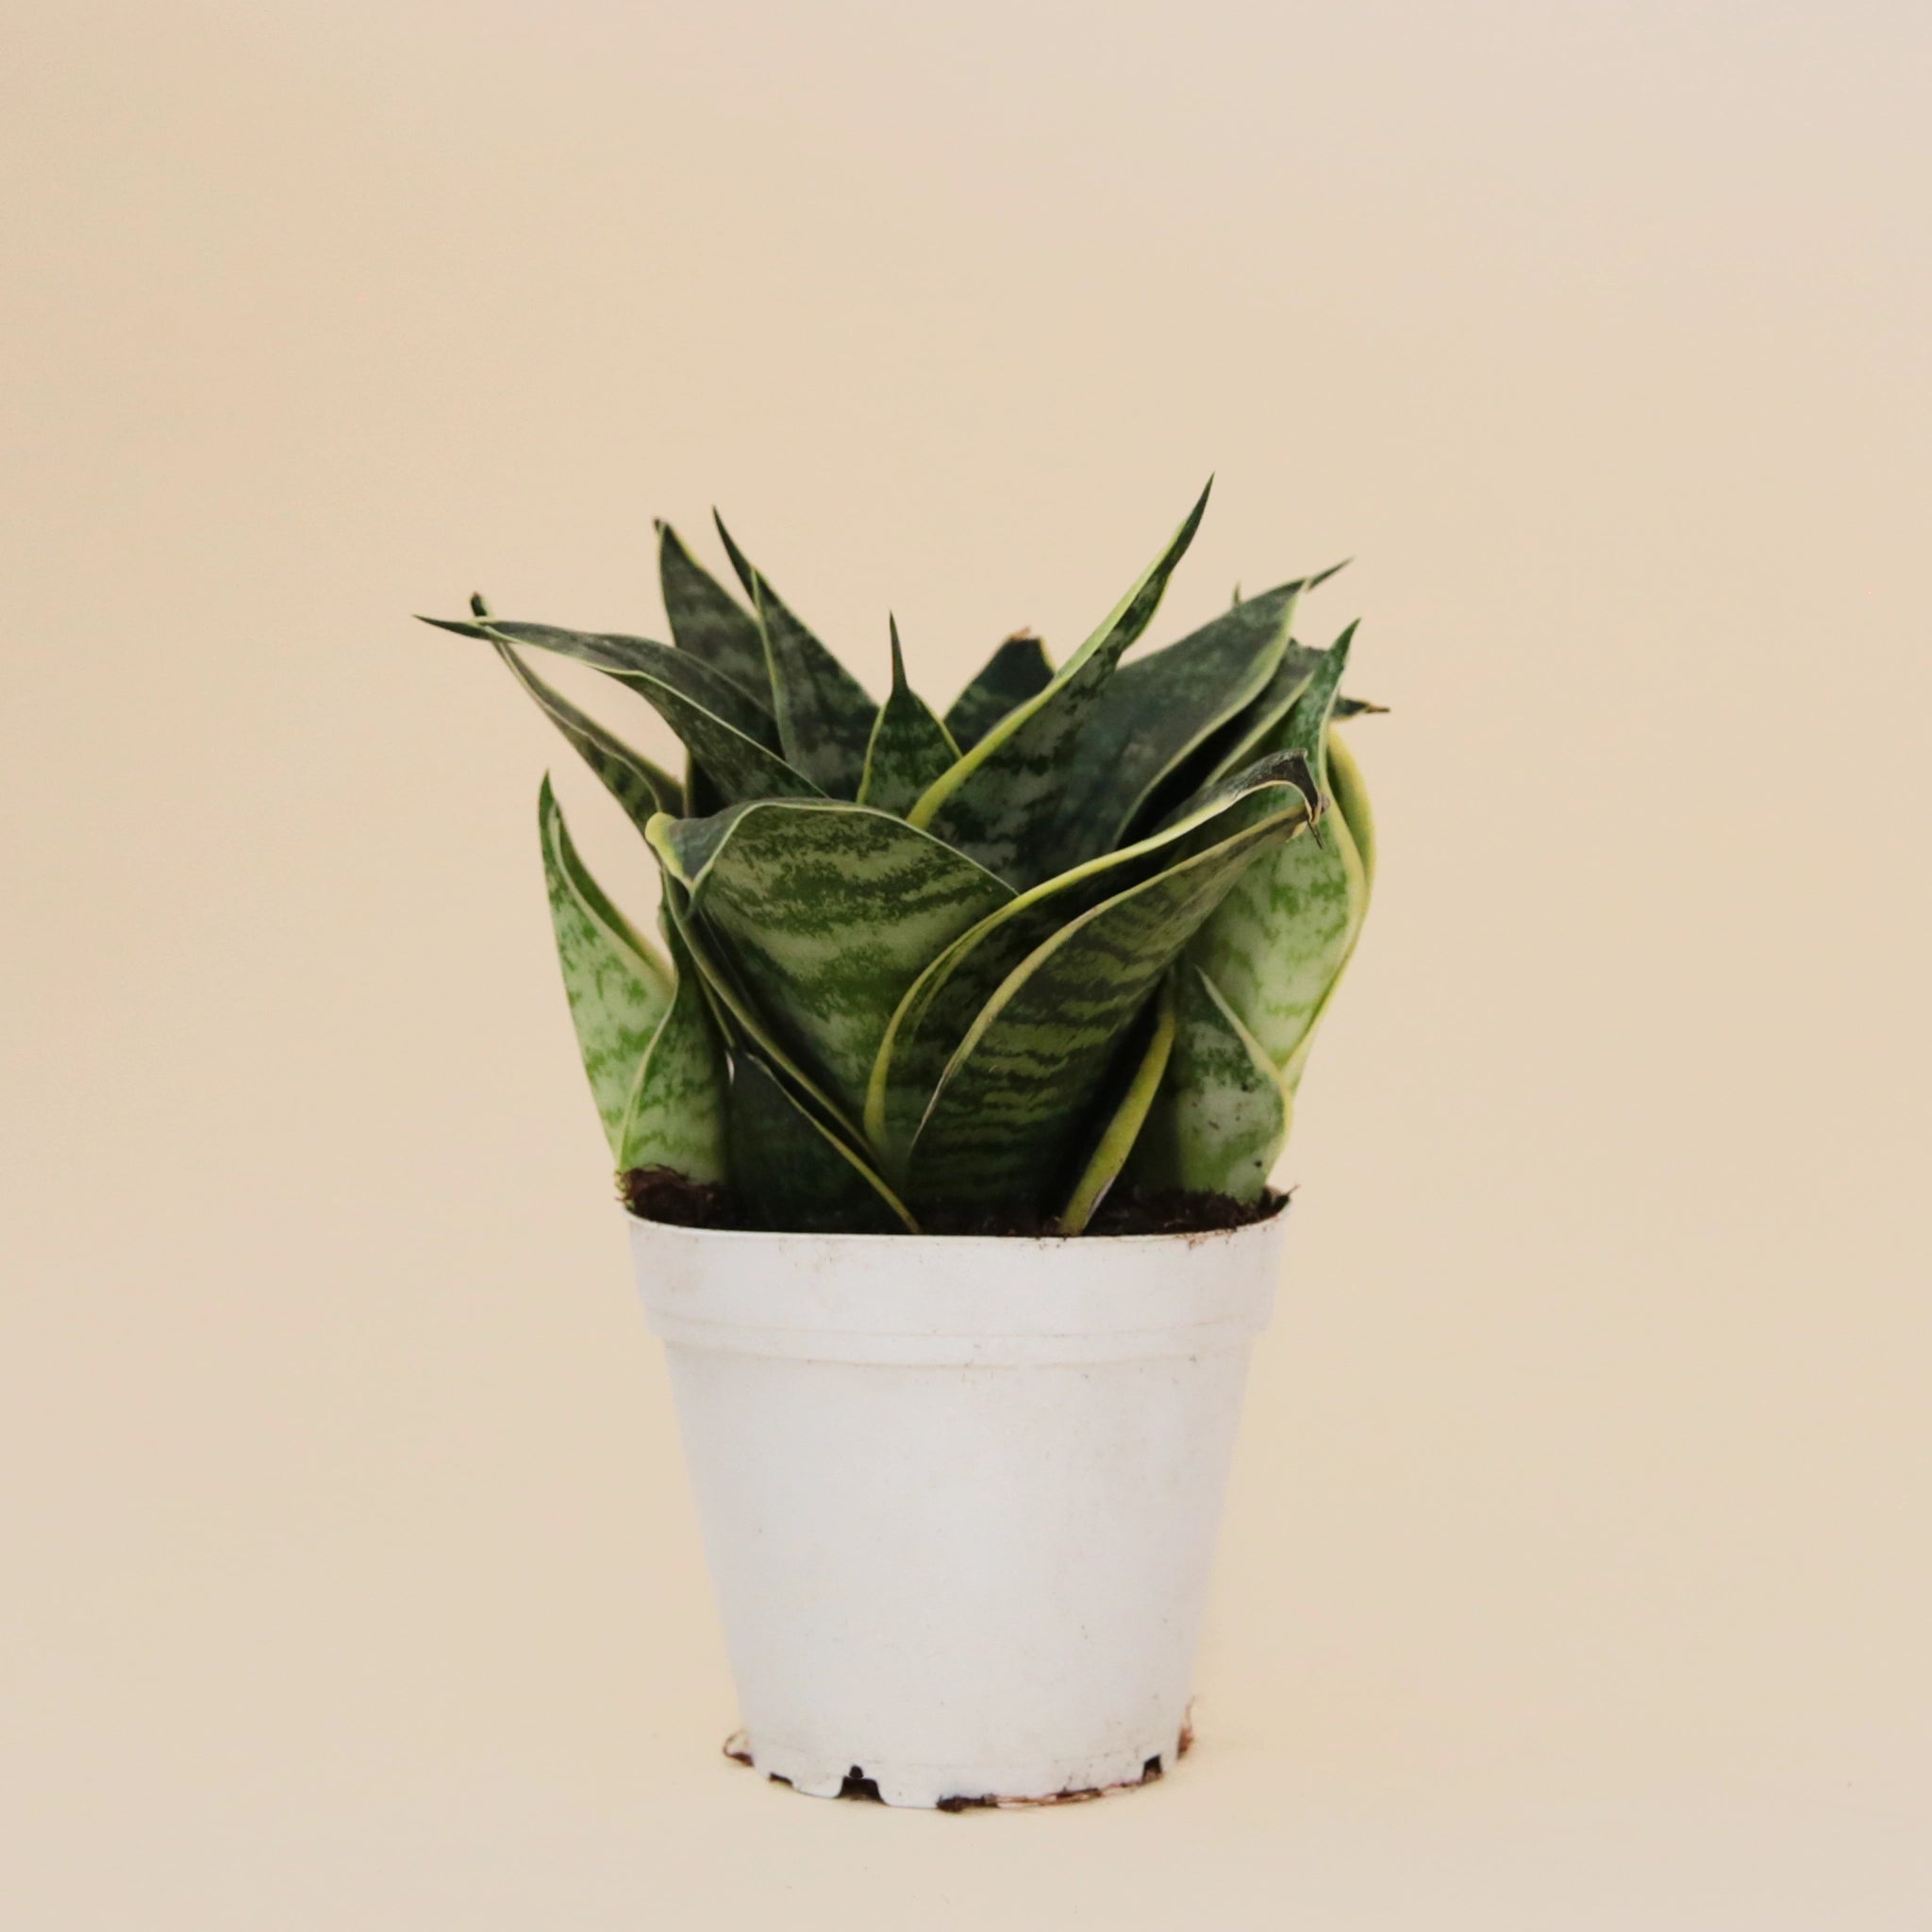 On a neutral background is a Sansevieria Ocean plant.